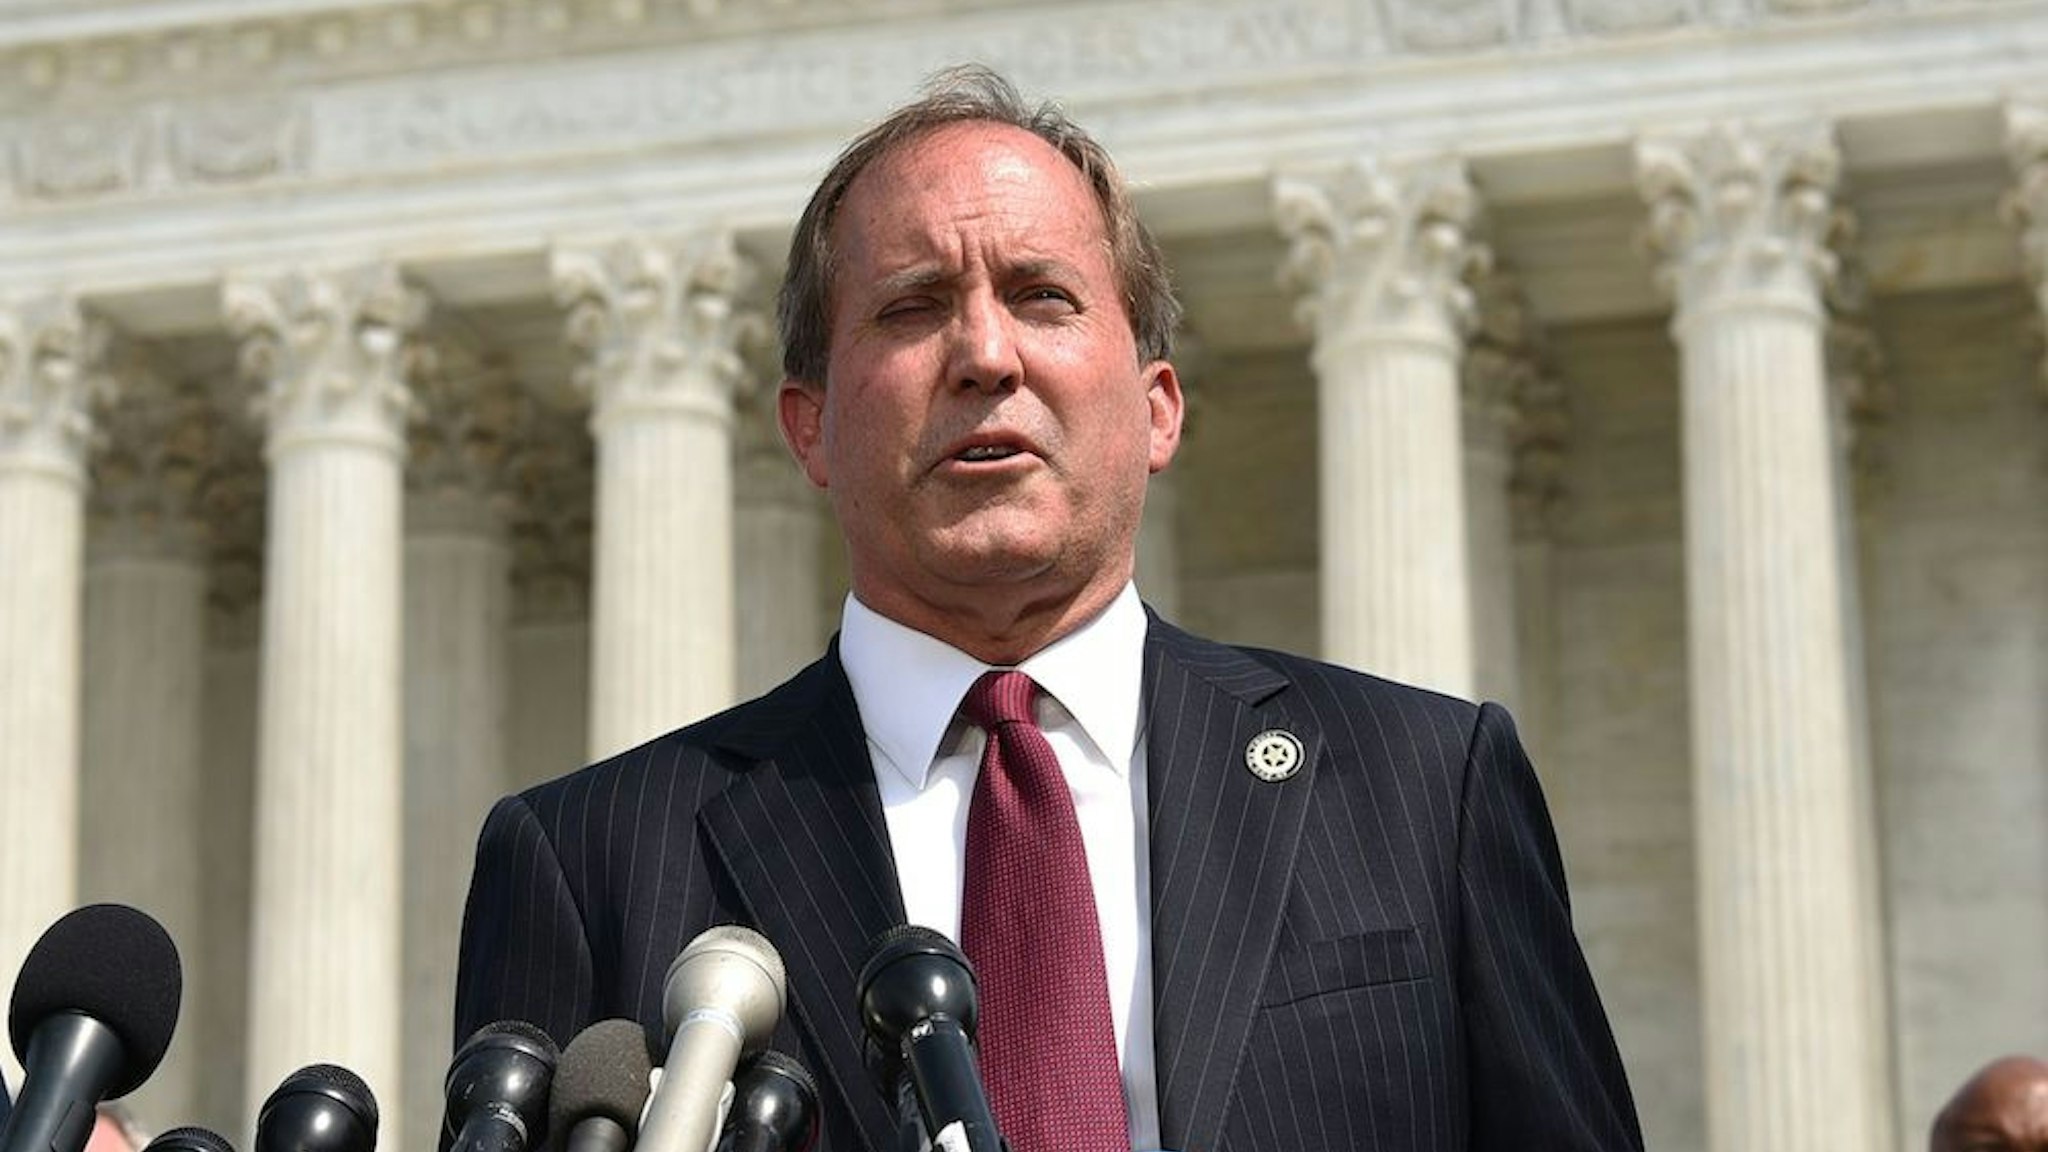 District of Columbia Attorney General Karl Racine (L) and Texas Attorney General Ken Paxton speak during the launch of an antitrust investigation into large tech companies outside of the US Supreme Court in Washington, DC on September 9, 2019. - The backlash against Big Tech heads into a new phase Monday with another broad antitrust investigation, highlighting the mounting legal challenges facing the dominant online platforms. Top legal officials from dozens of US states were set to unveil a probe of Google over allegations of "anticompetitive behavior," days after a separate coalition announced a similar investigation of social networking giant Facebook. (Photo by MANDEL NGAN / AFP) (Photo by MANDEL NGAN/AFP via Getty Images)